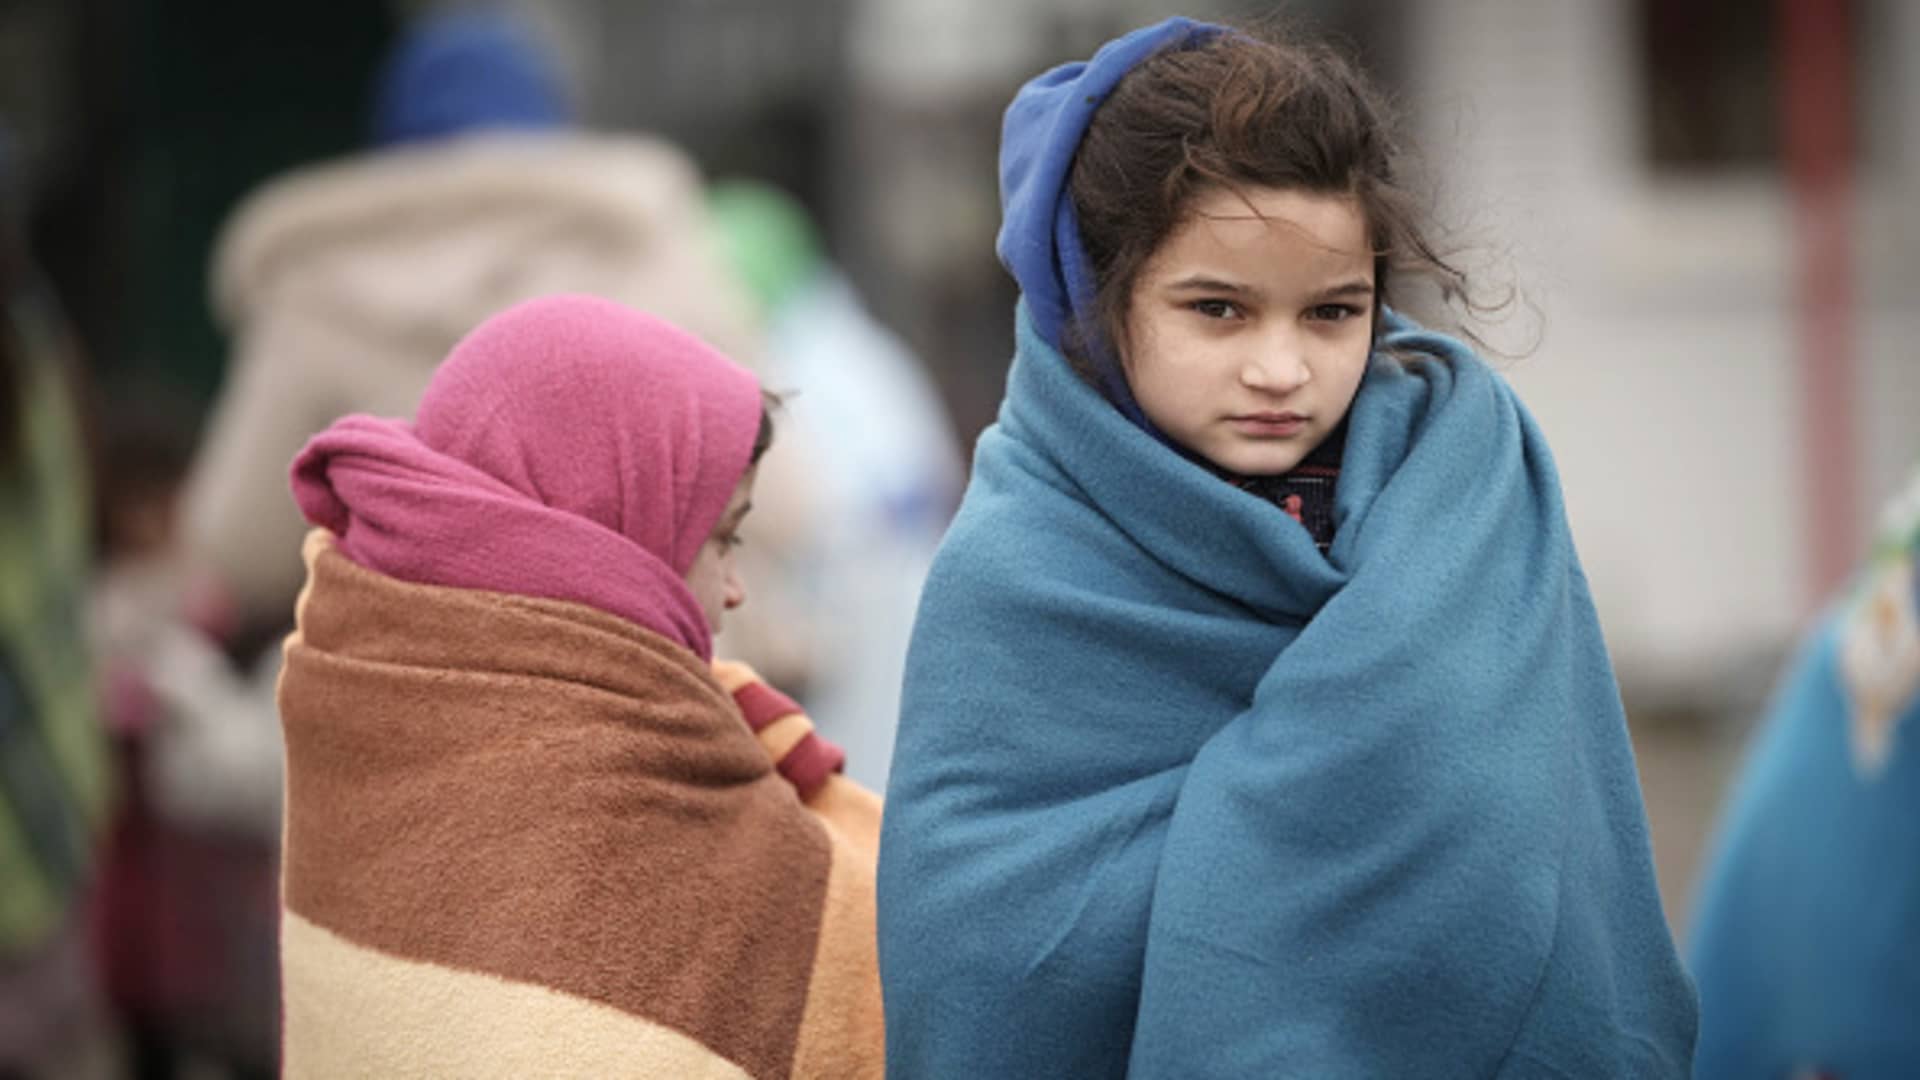 Refugee children fleeing Ukraine are given blankets by Slovakian rescue workers to keep warm at the Velke Slemence border crossing on March 09, 2022 in Velke Slemence, Slovakia.